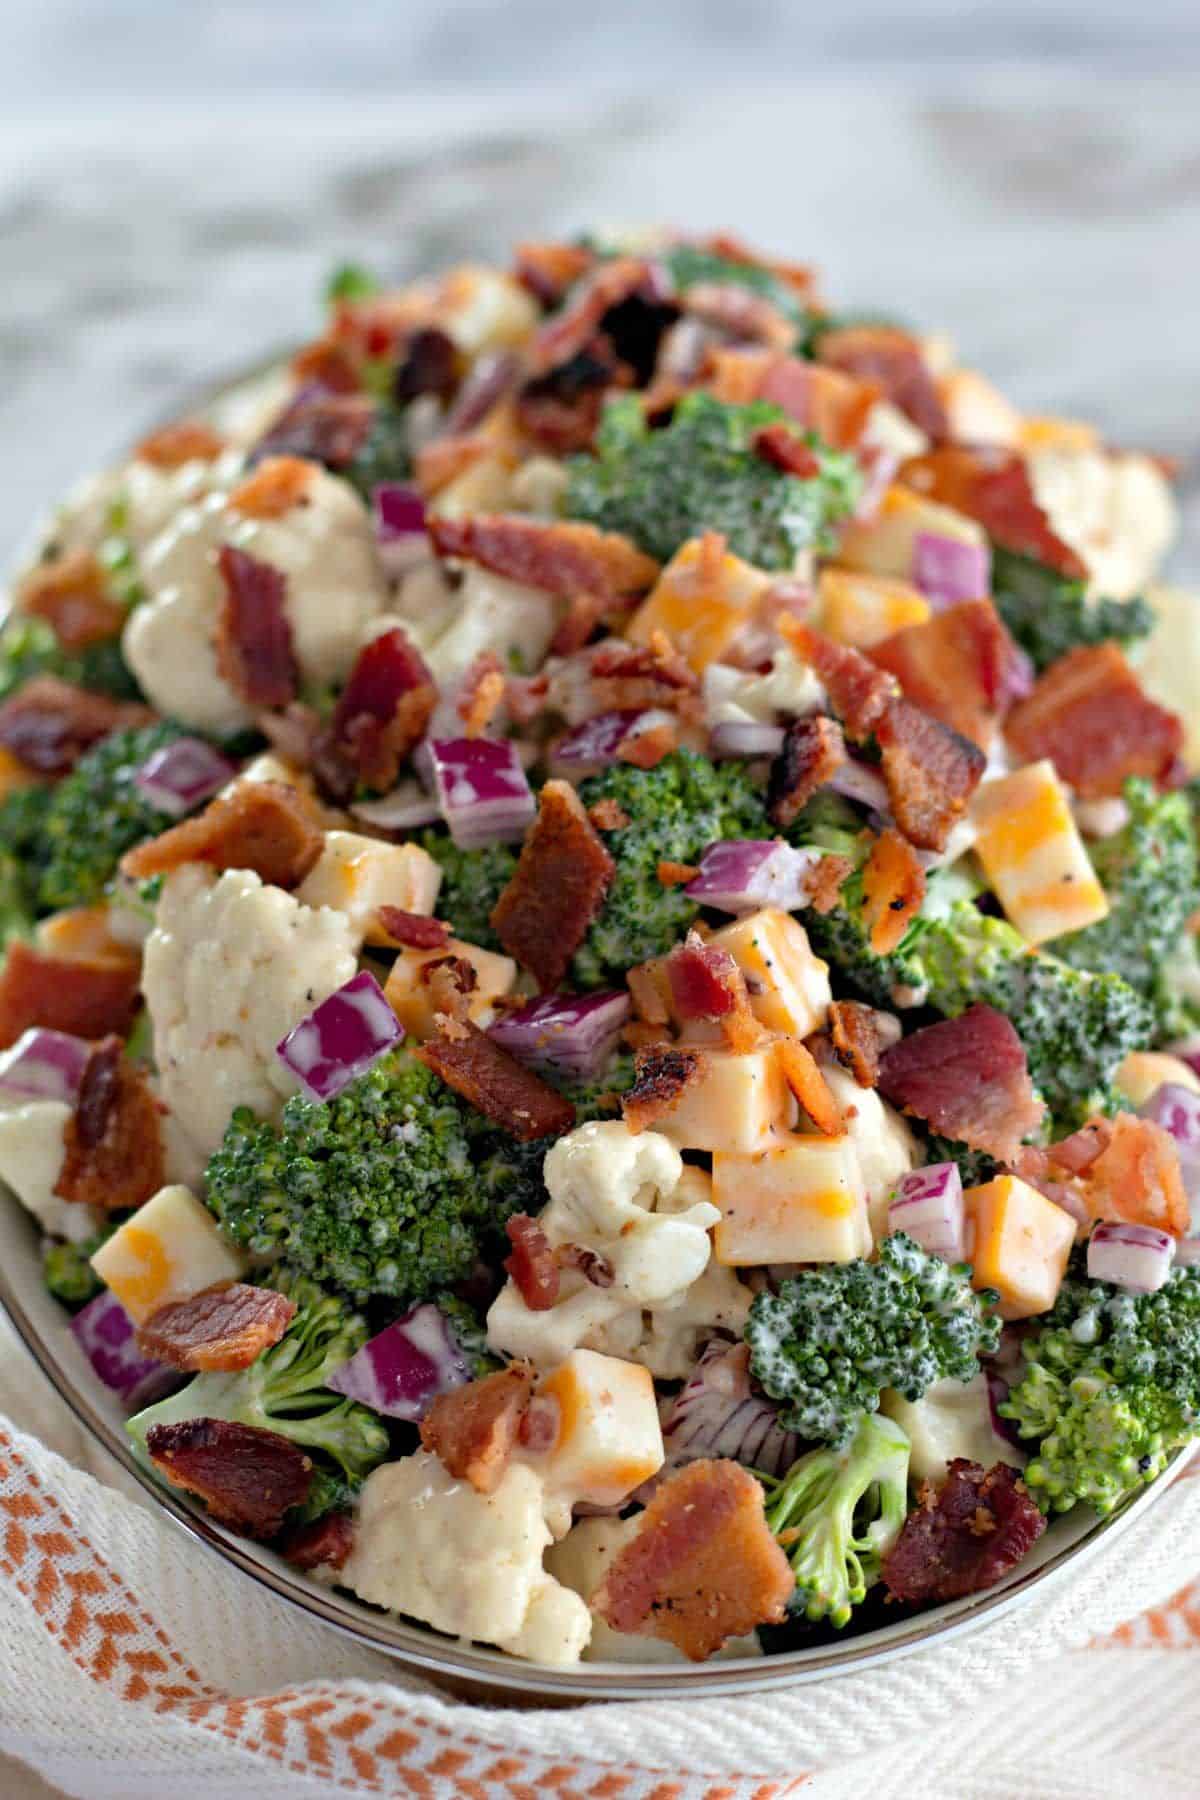 Delicious Low-Carb Loaded Broccoli Salad in a bowl.